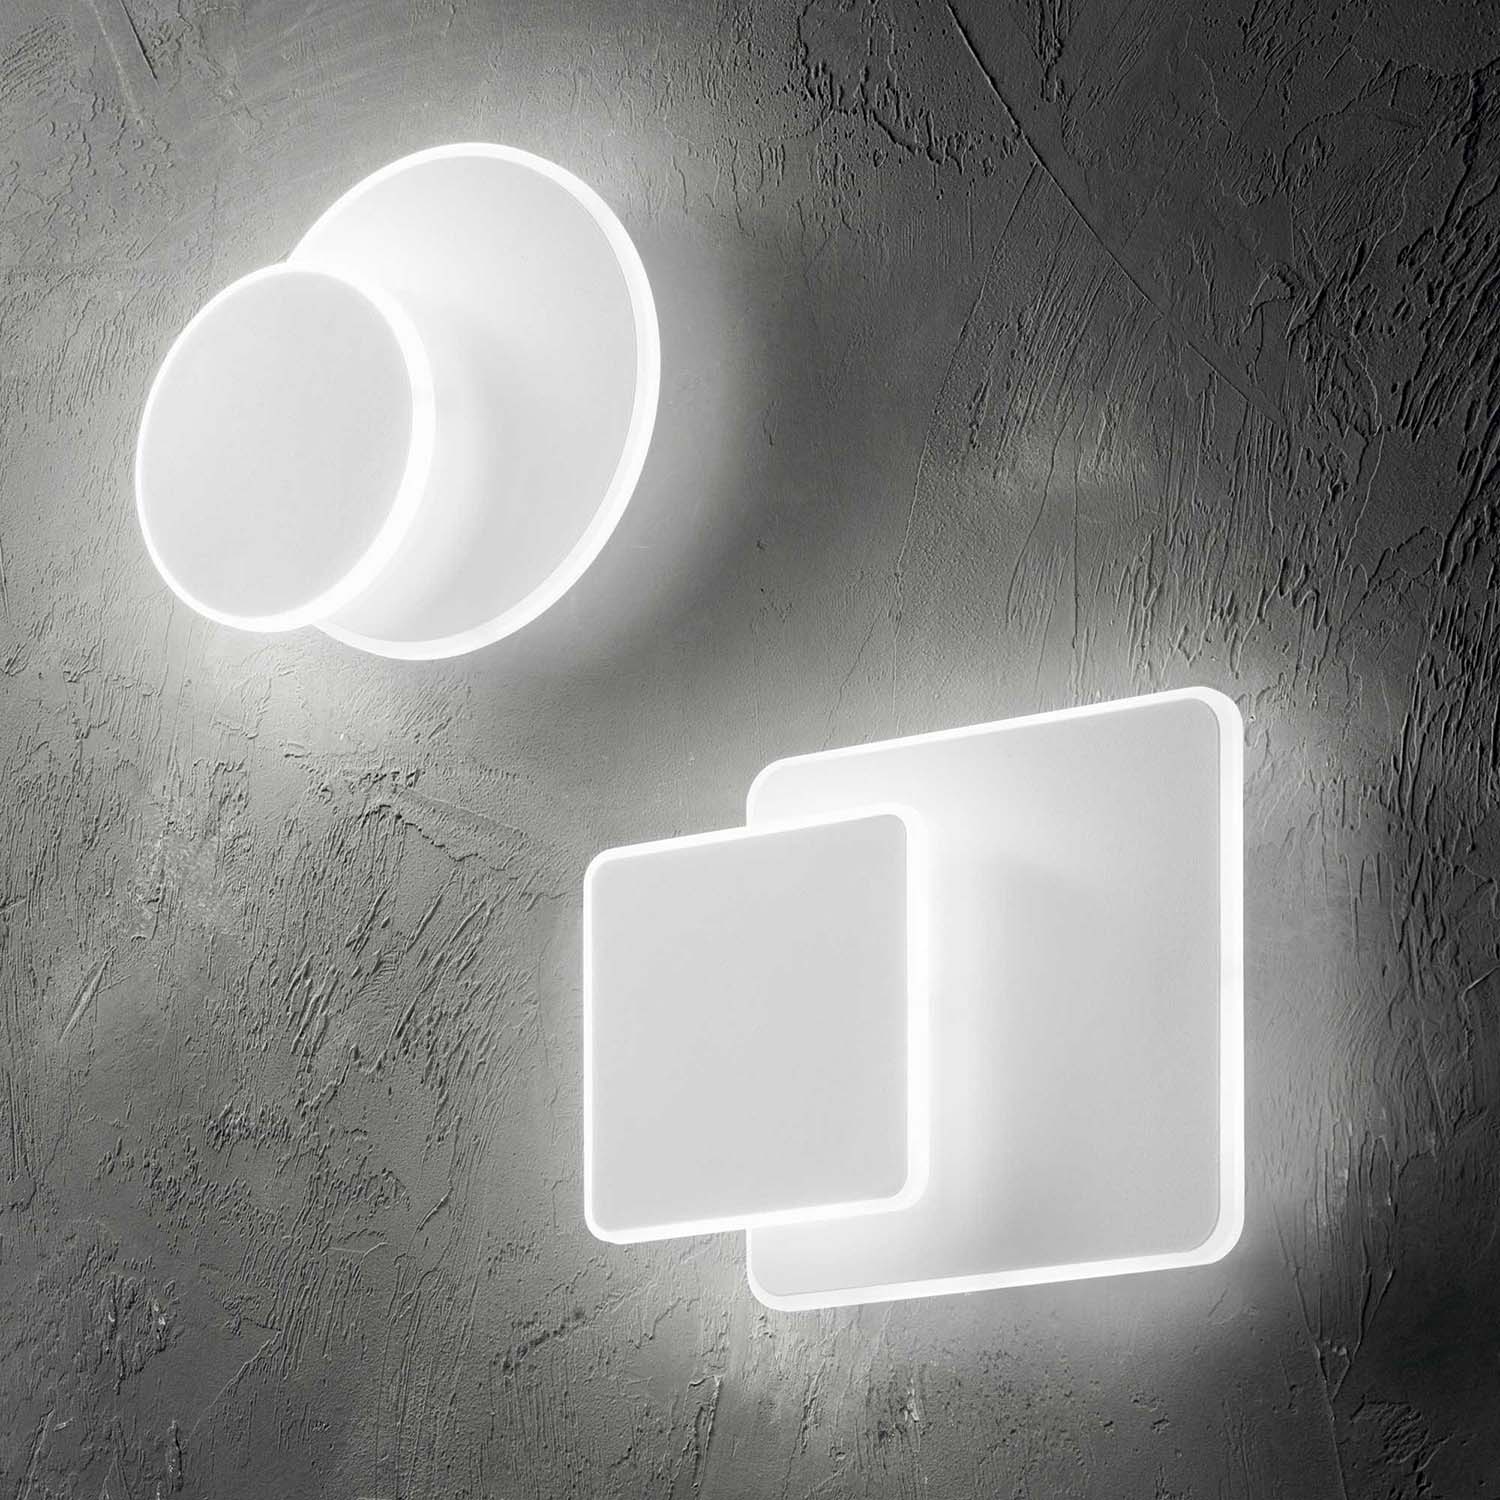 POUCHE ROUND - Round design wall light with LED